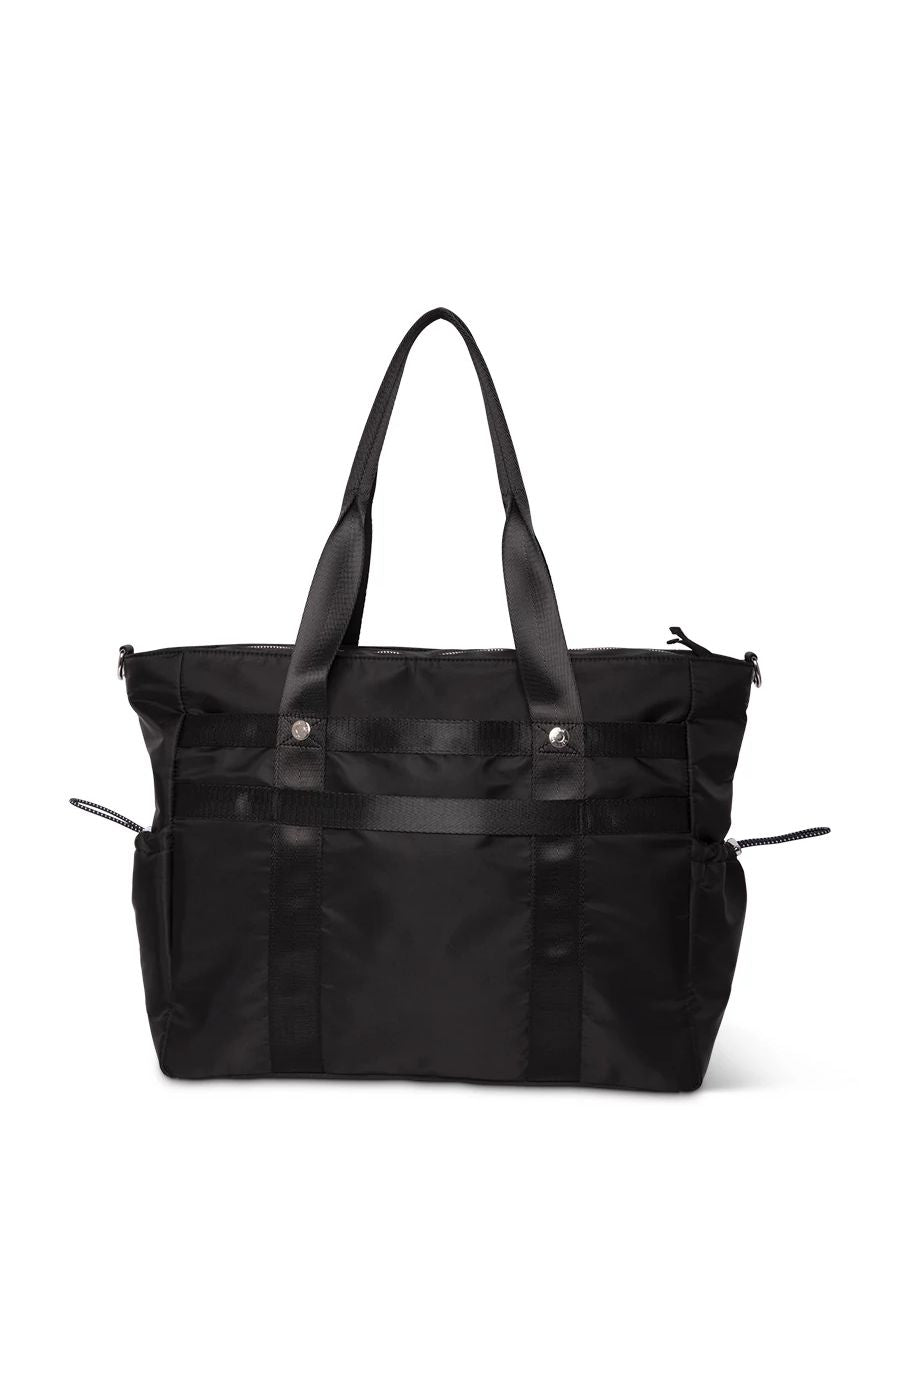 All You Can Fit Tote Black – koihappiness